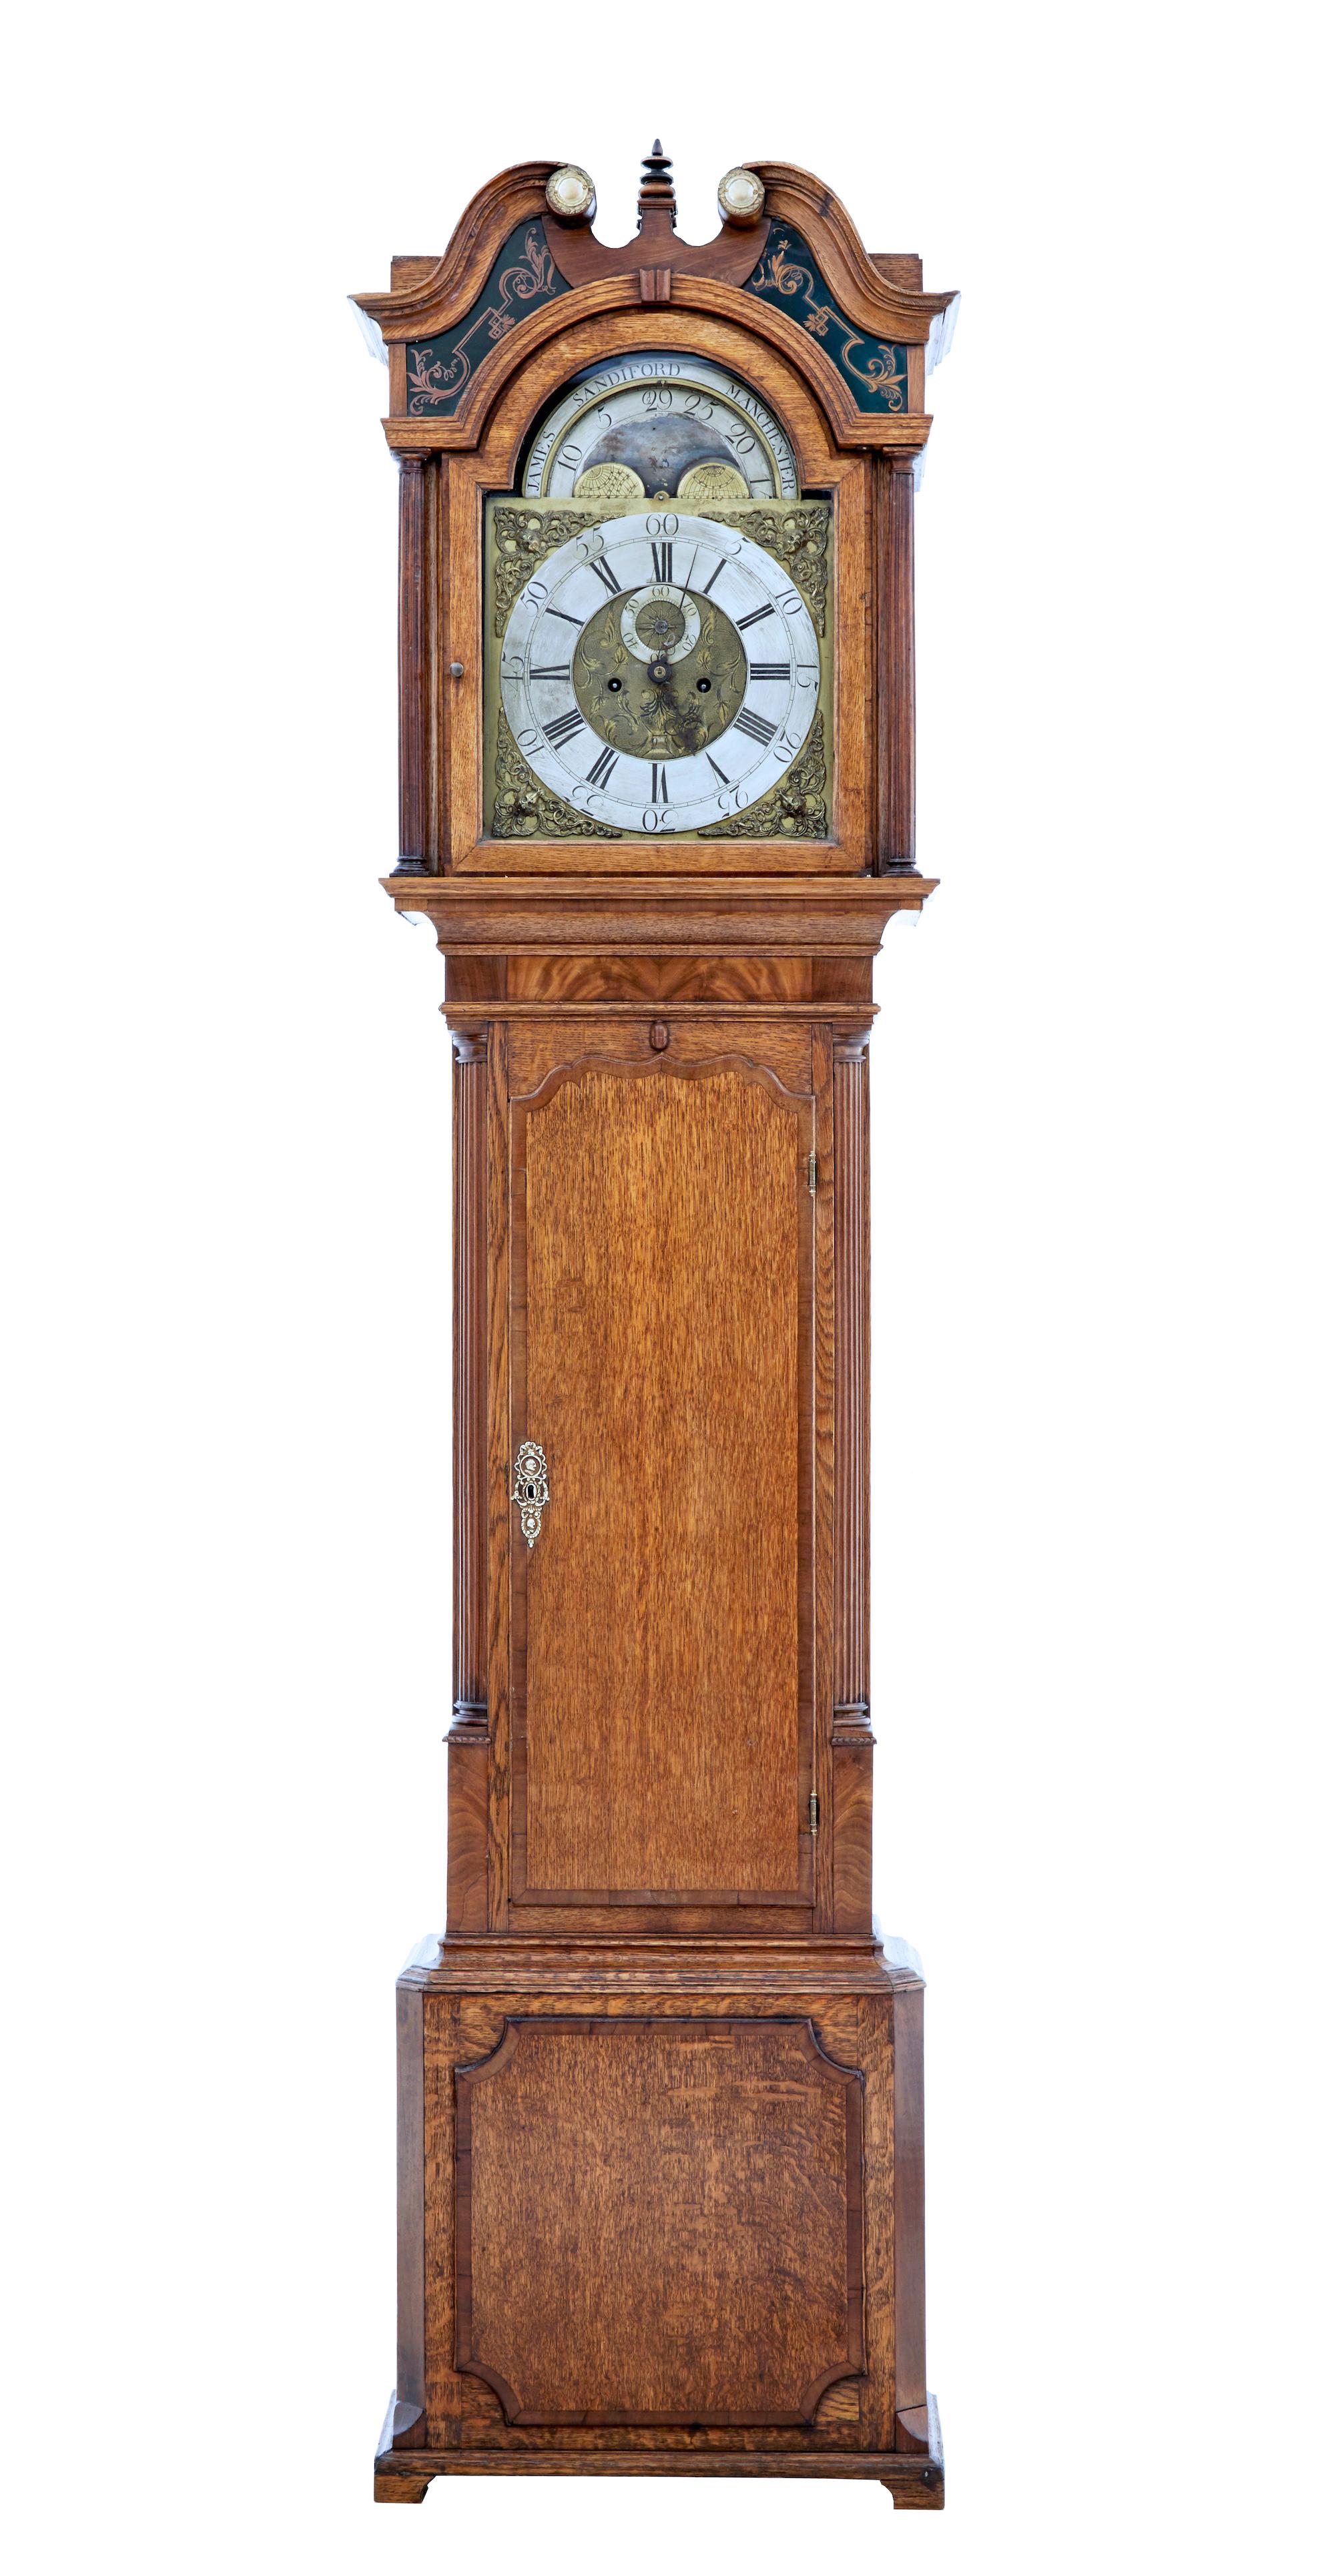 18th century oak longcase clock James Sandiford of Manchester circa 1750.

George II oak longcase clock circa 1750. Movement made and signed by the well known movement maker James Sandiford of Manchester. Movement with roman and Arabic numerals